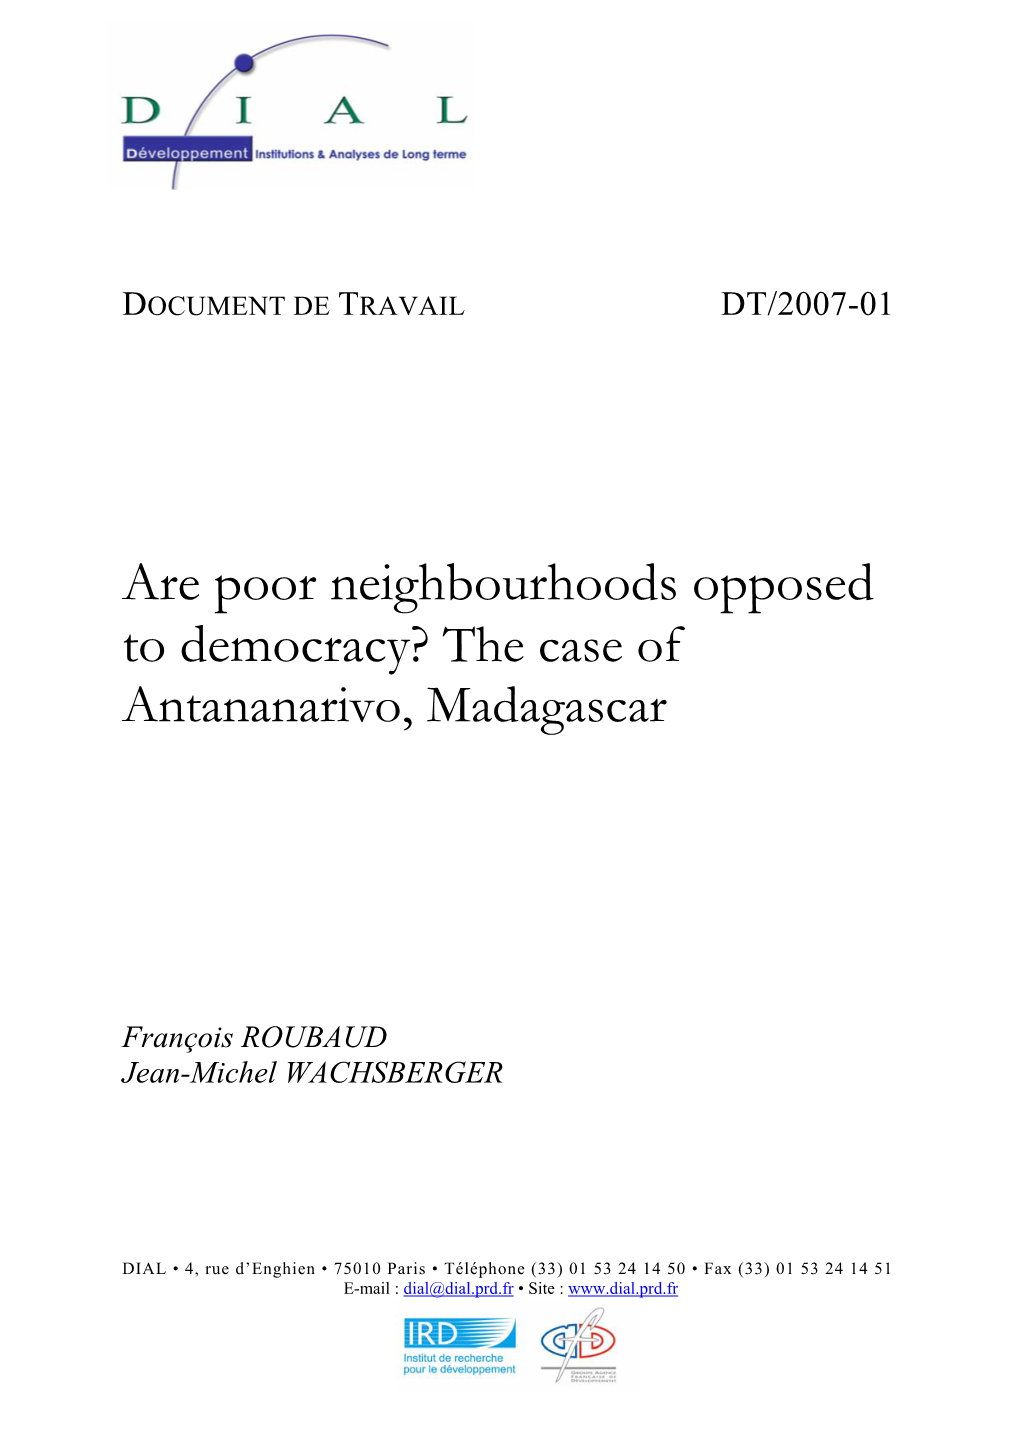 Are Poor Neighbourhoods Opposed to Democracy? the Case of Antananarivo, Madagascar